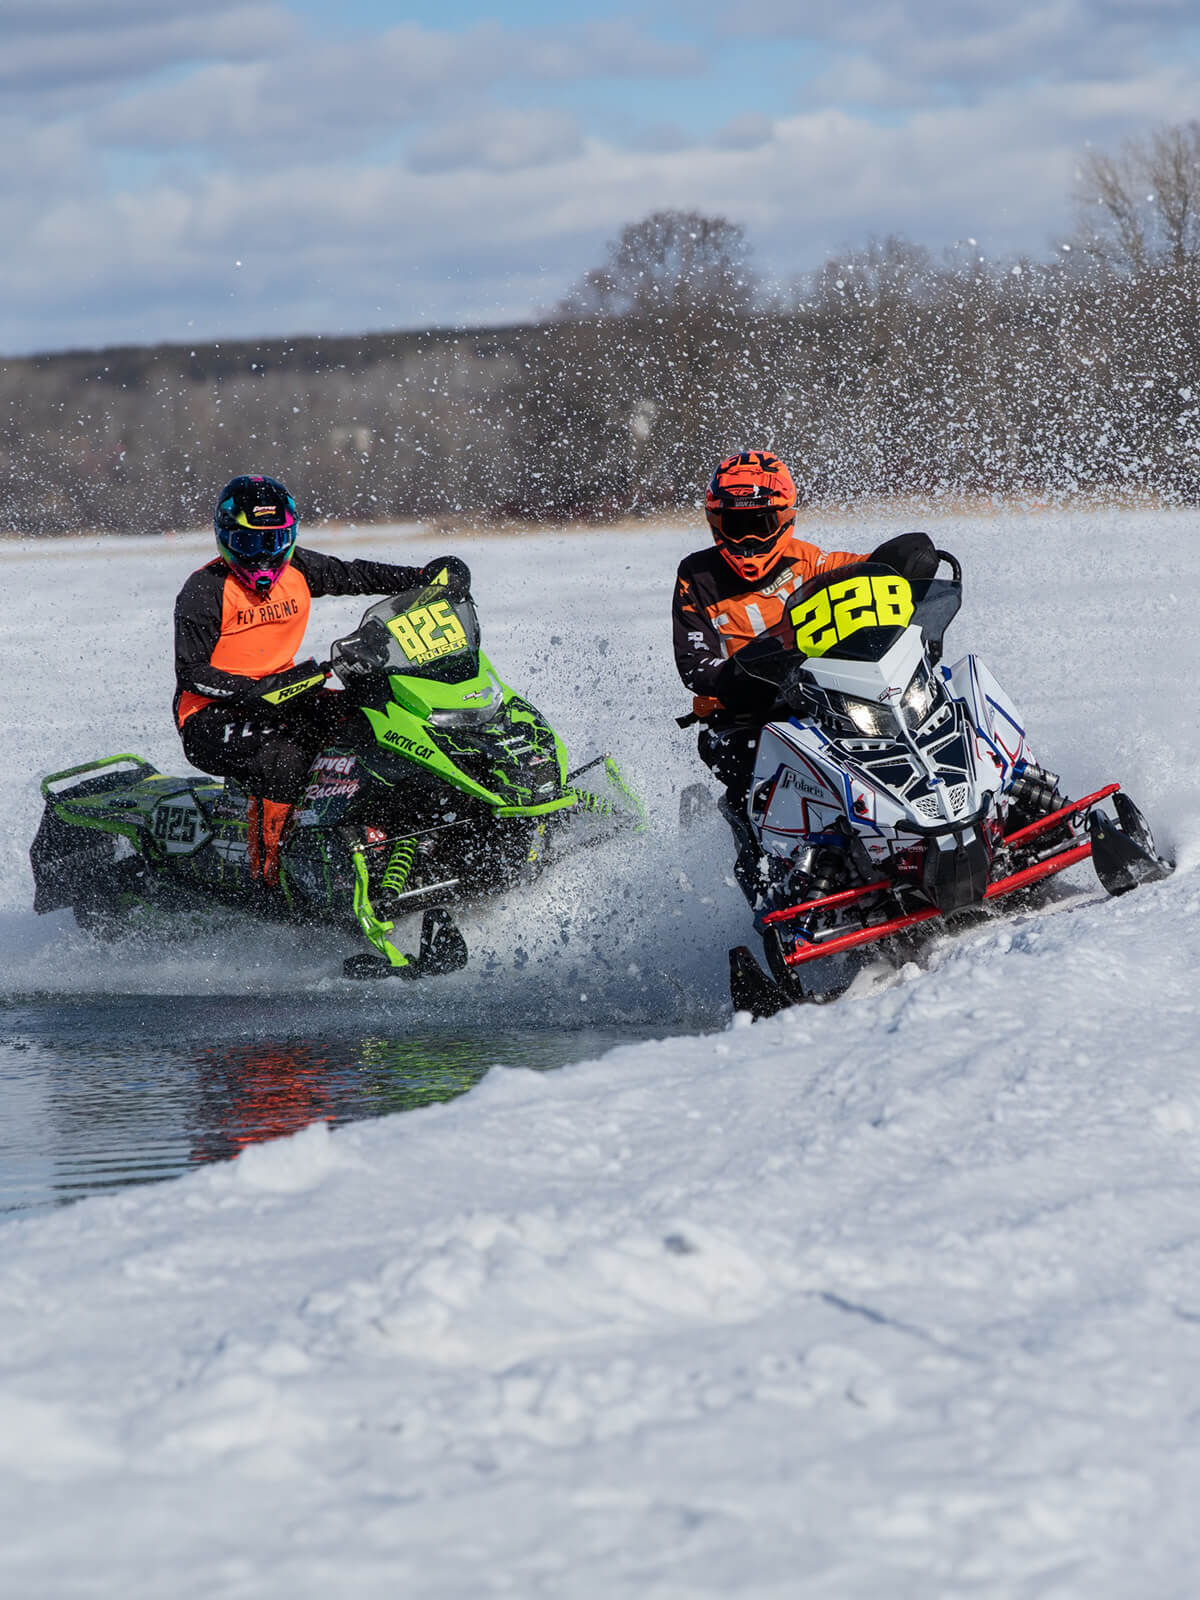 Two cross country snowmobile racers from Cor Powersports with C&A Pro skis